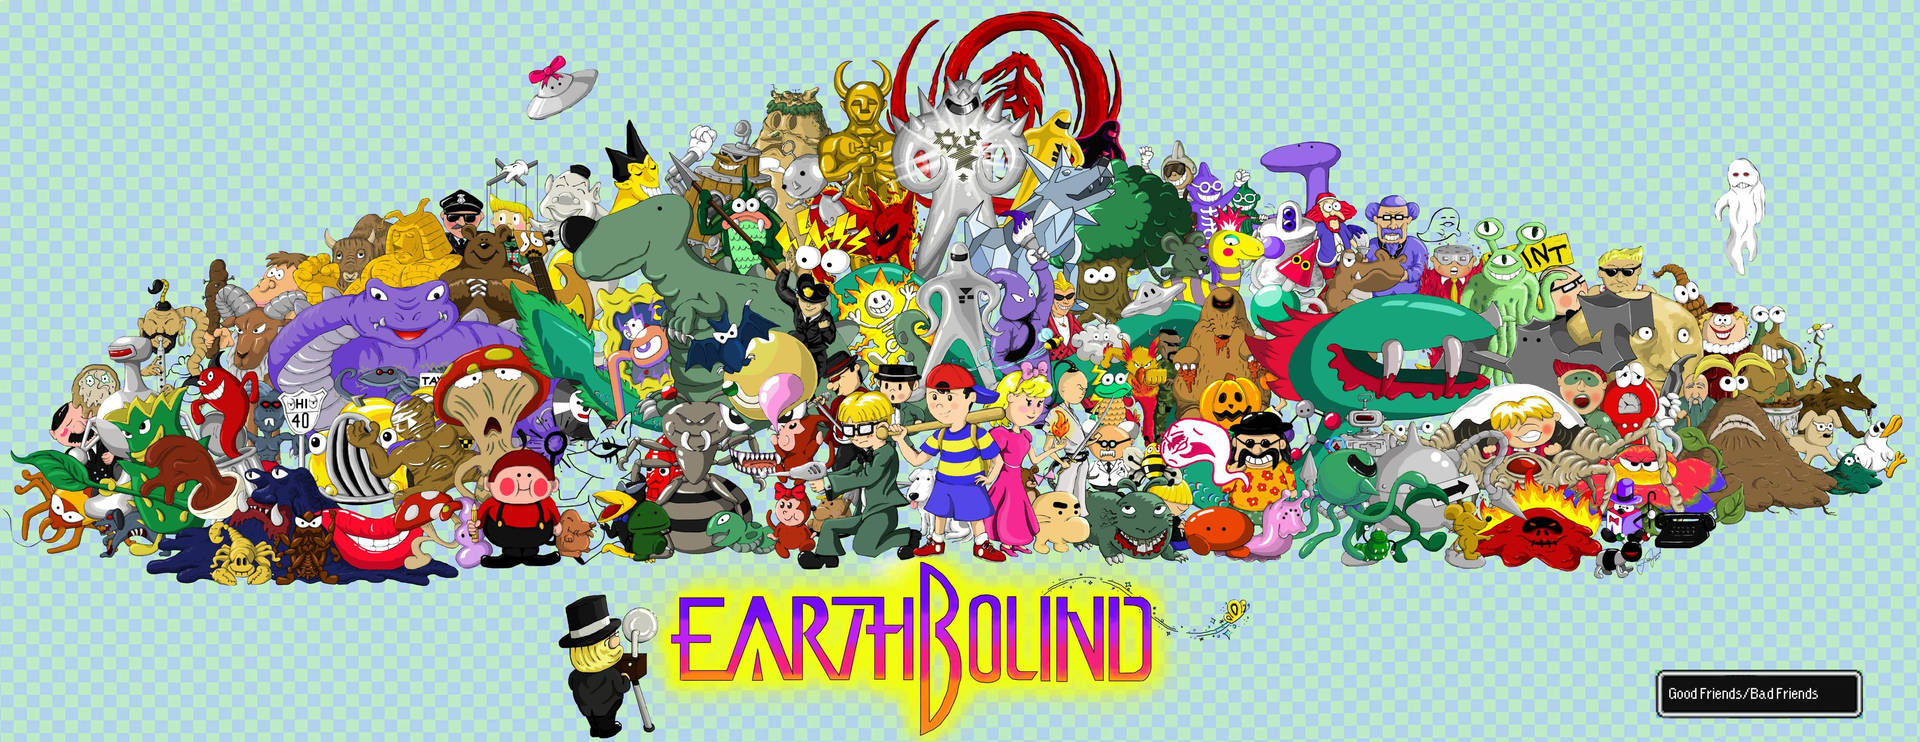 Earthbound Group Picture Art Background